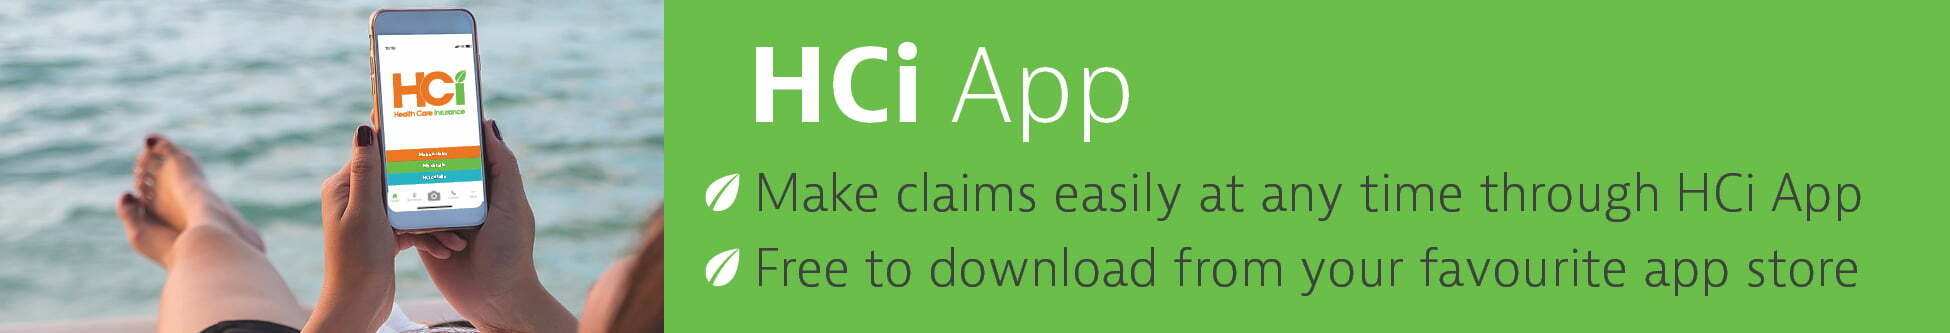 Make claims easily at any time through HCi app - free to download » HCi